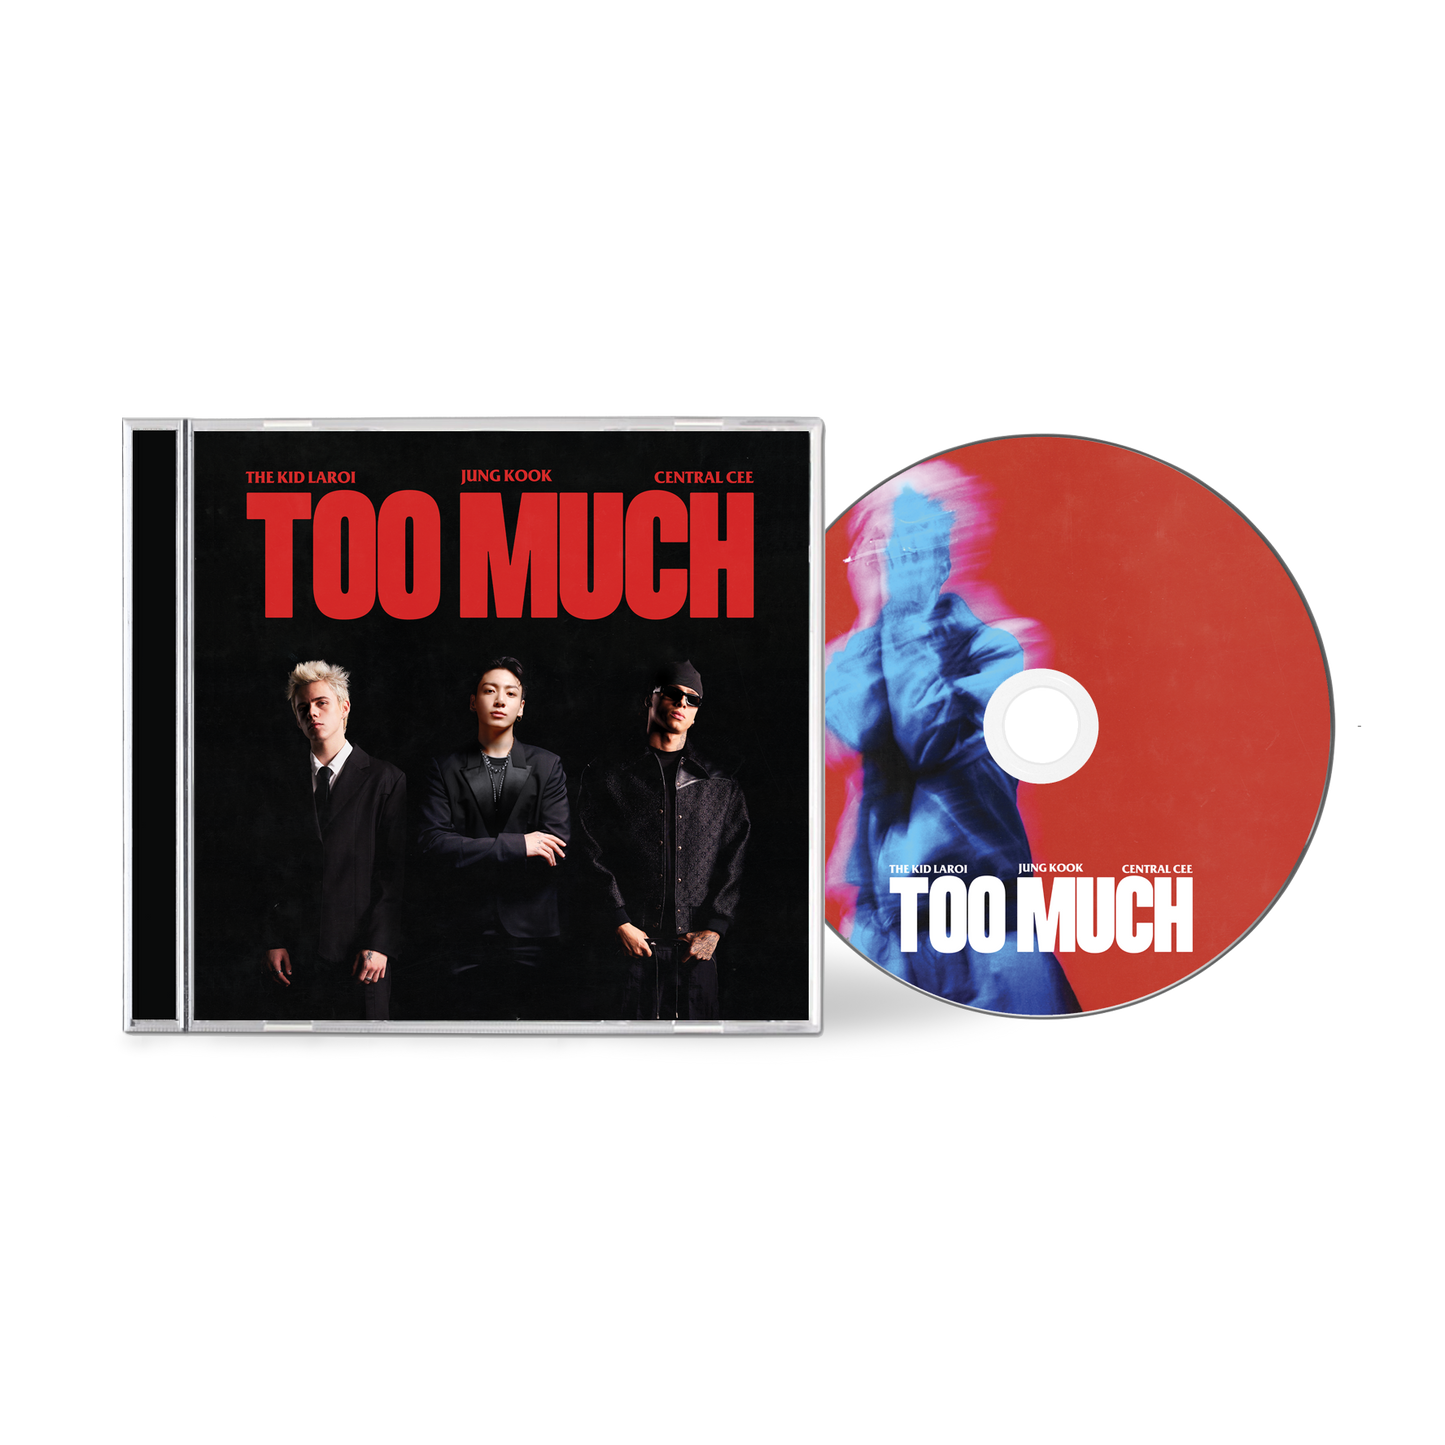 TOO MUCH CD Single (Black Cover)  Official The Kid LAROI – THE KID LAROI